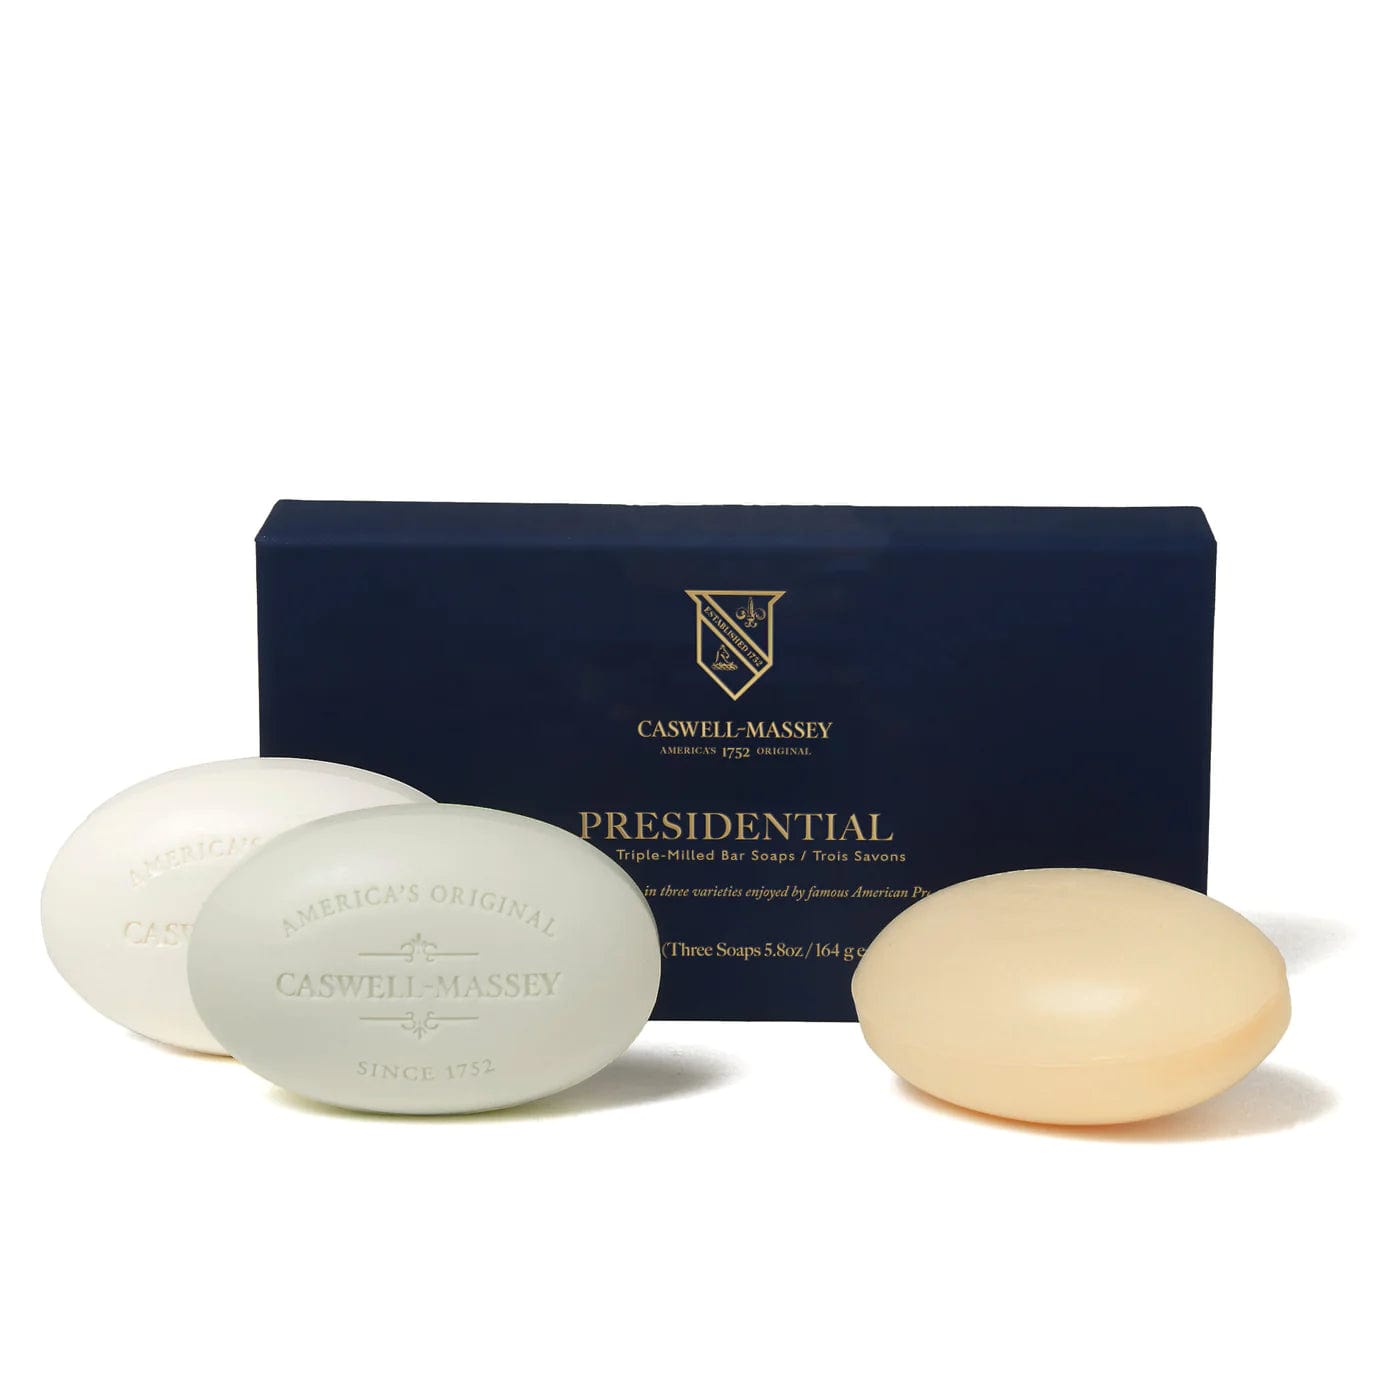 Caswell-Massey Men's Accessories 3-5.8oz Bars Caswell-Massey Presidential Three-Soap Bar Set